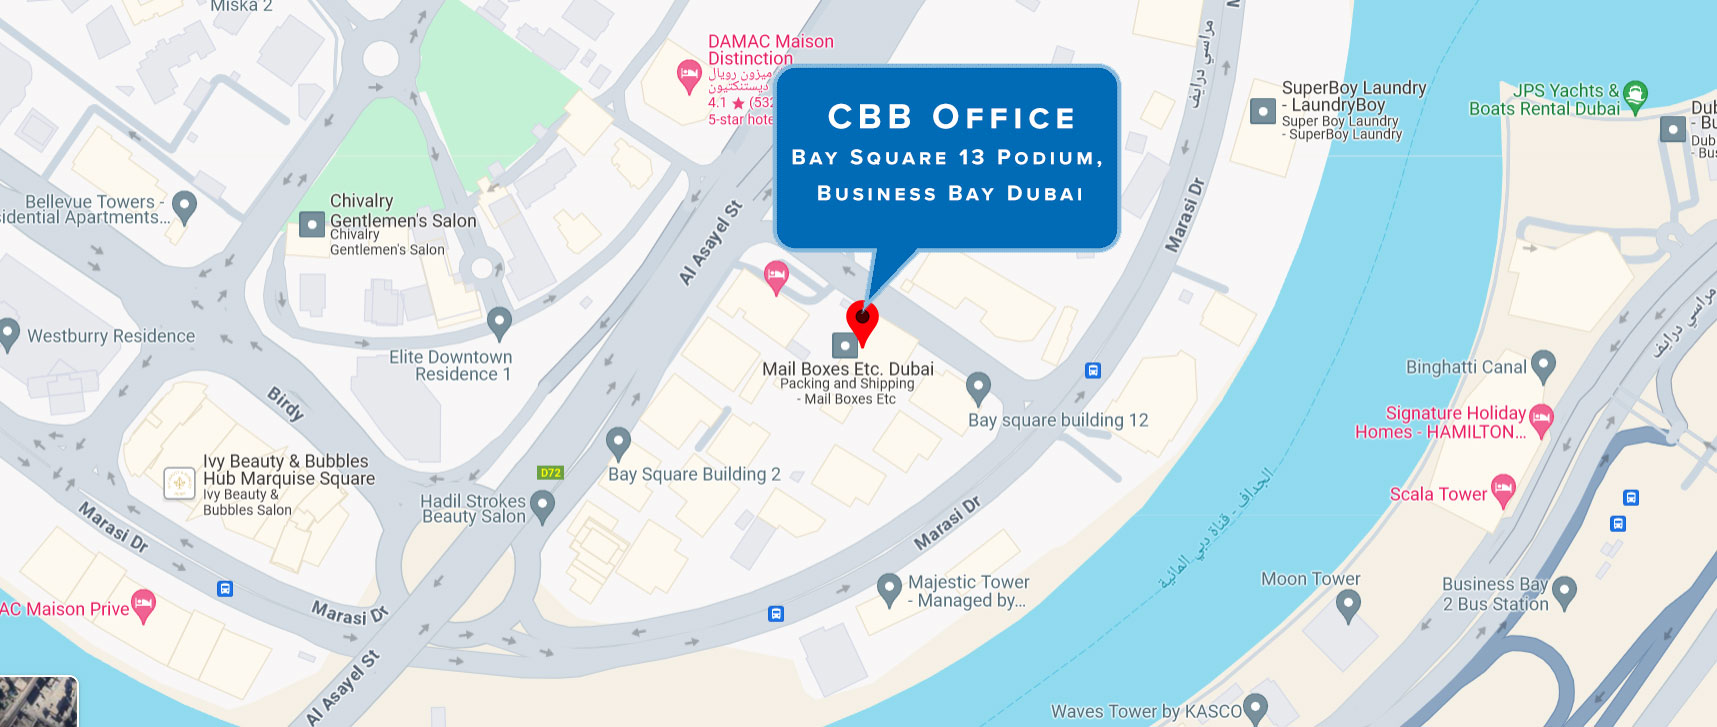 Office Address : Commercial Business Brokers by Driven Properties Dubai